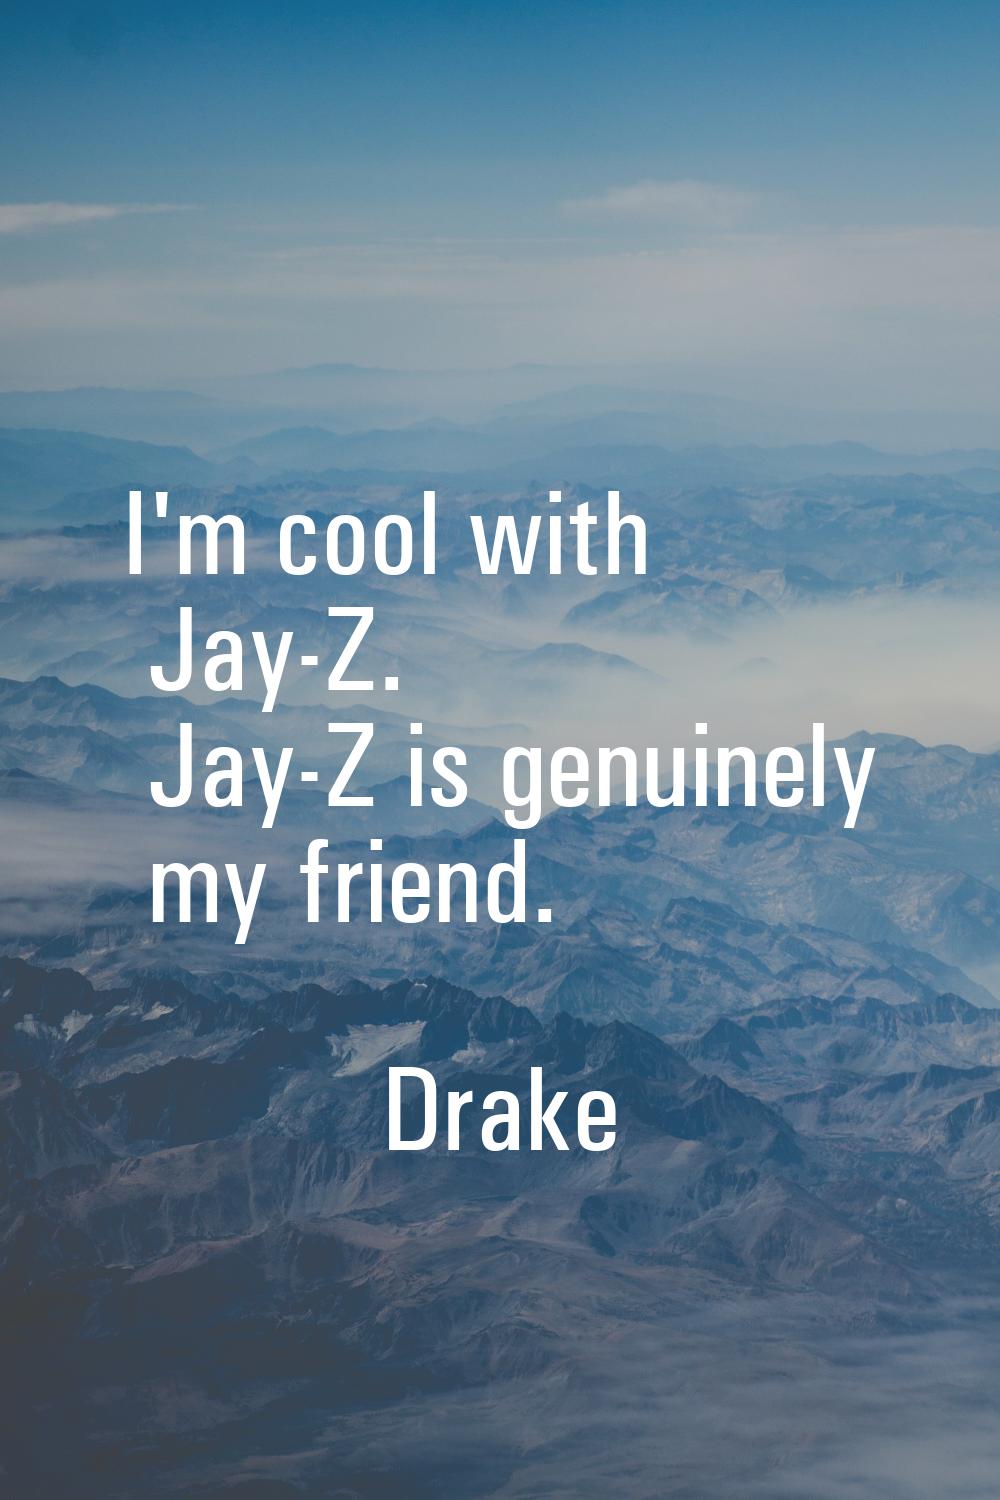 I'm cool with Jay-Z. Jay-Z is genuinely my friend.